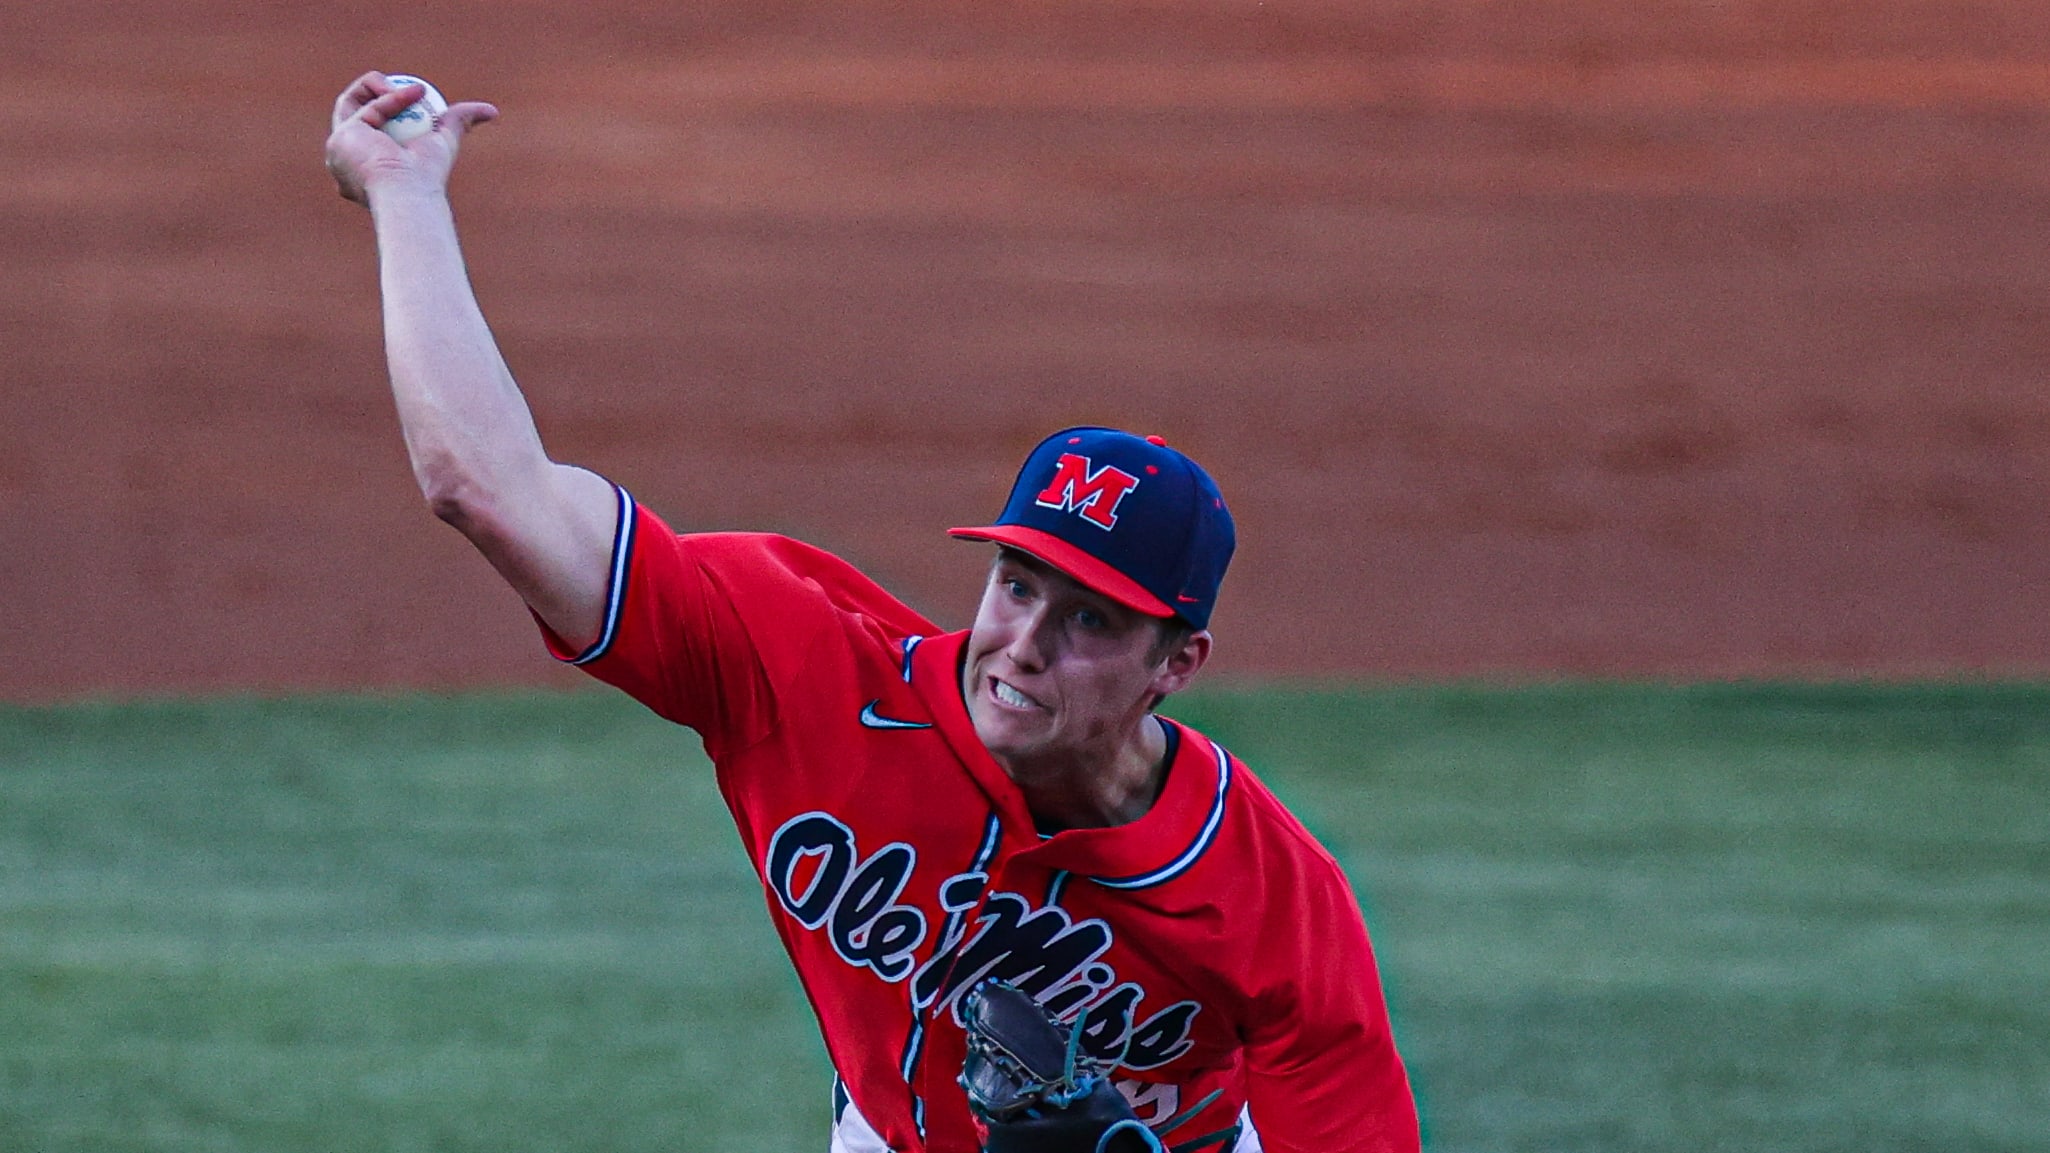 Anthony Stephan celebrates during the Virginia baseball game against Navy at Disharoon Park.